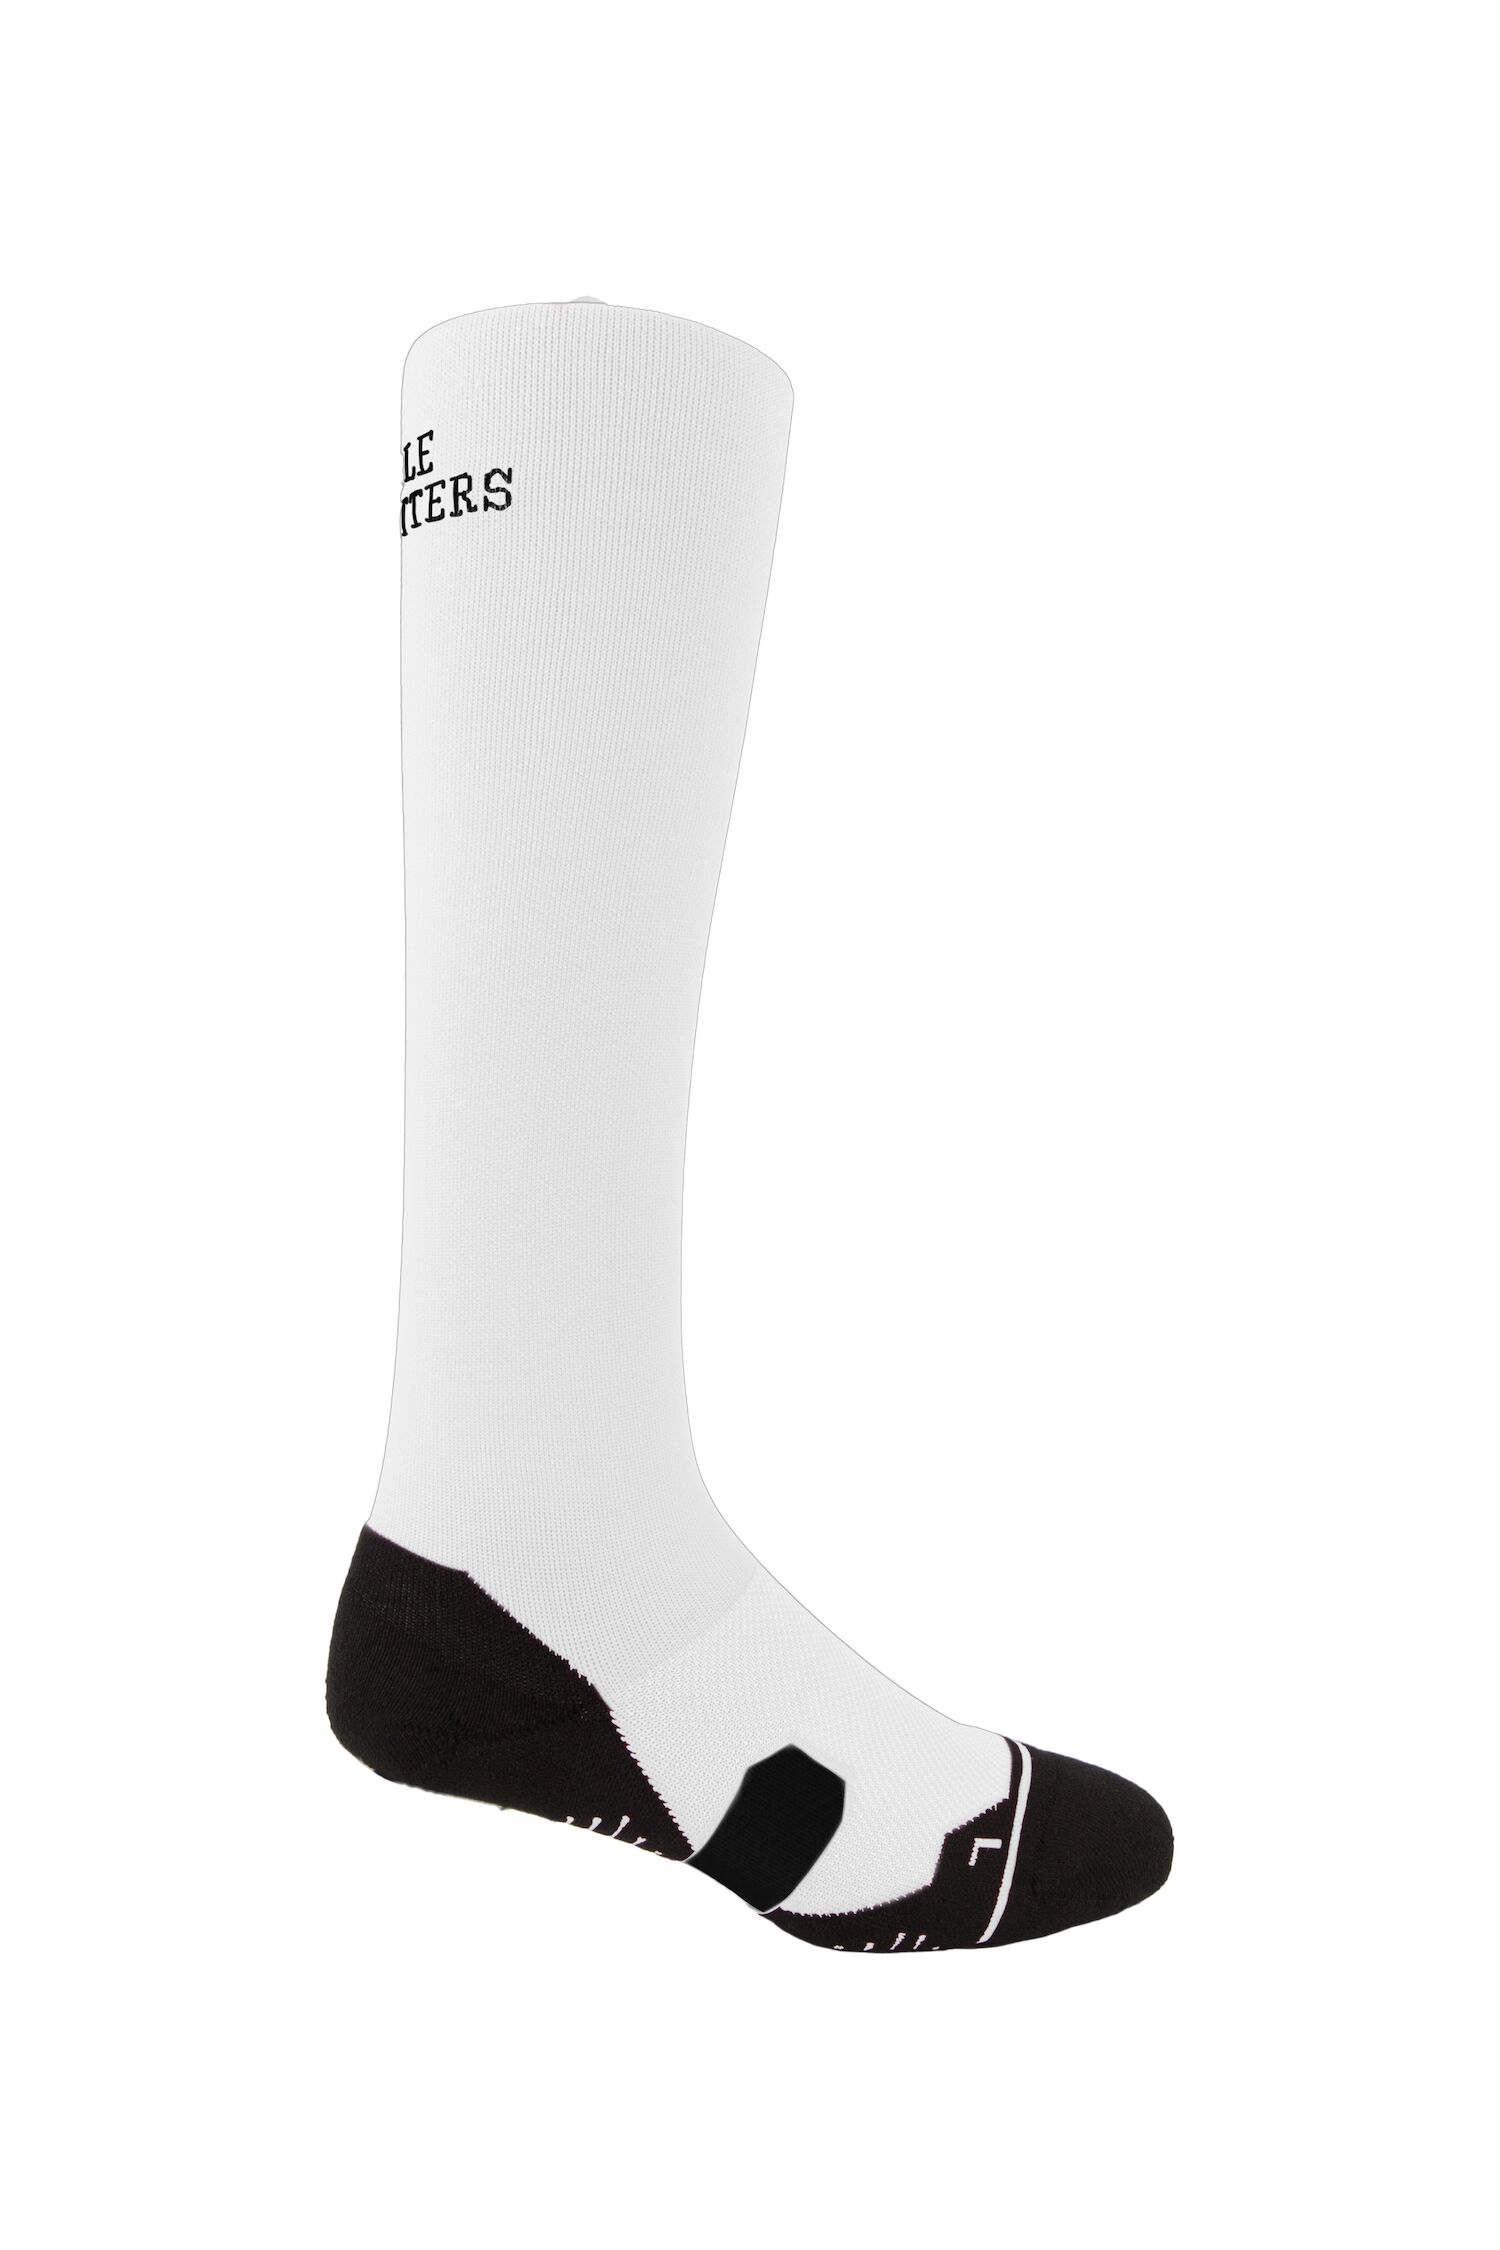 61008_010_Perfect Fit Boot Sock_White_Side.jpg